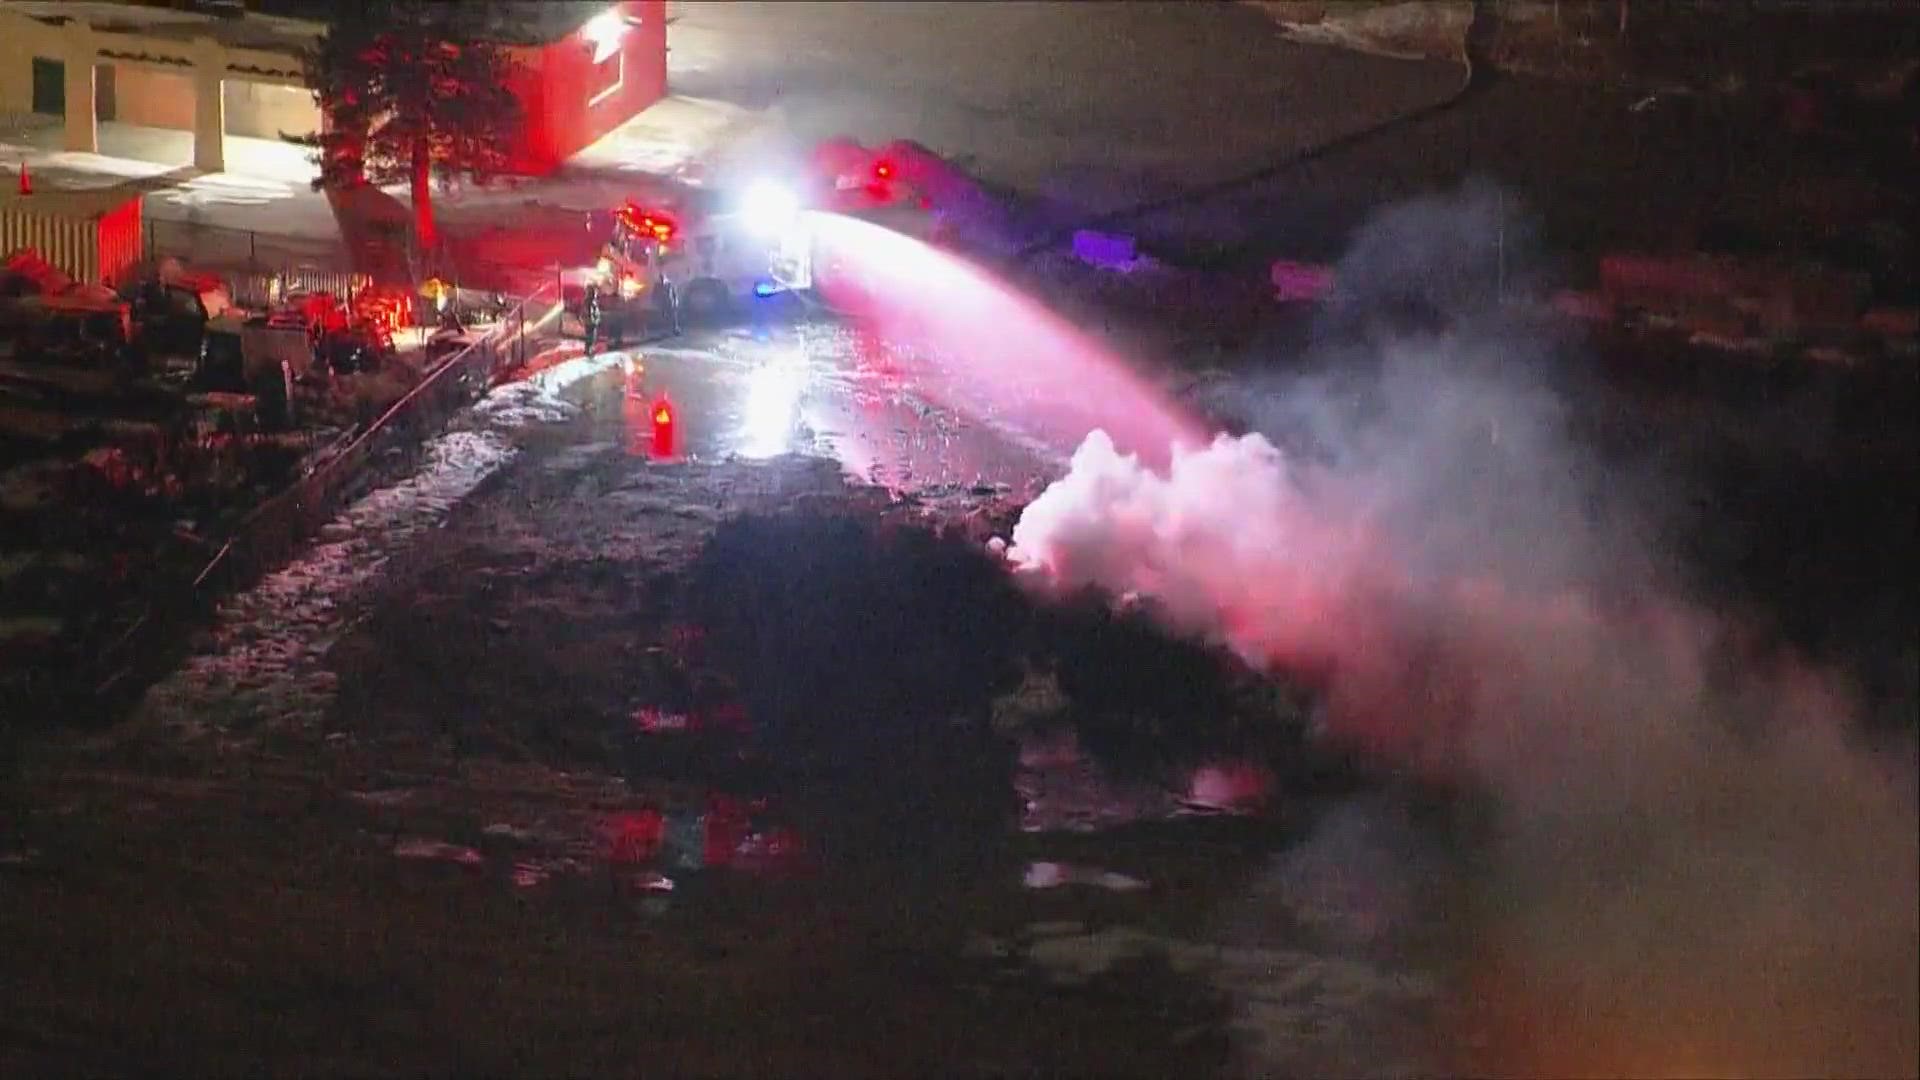 Fire crews responded to a brush fire in the parking lot at Sloan Lake in Denver.